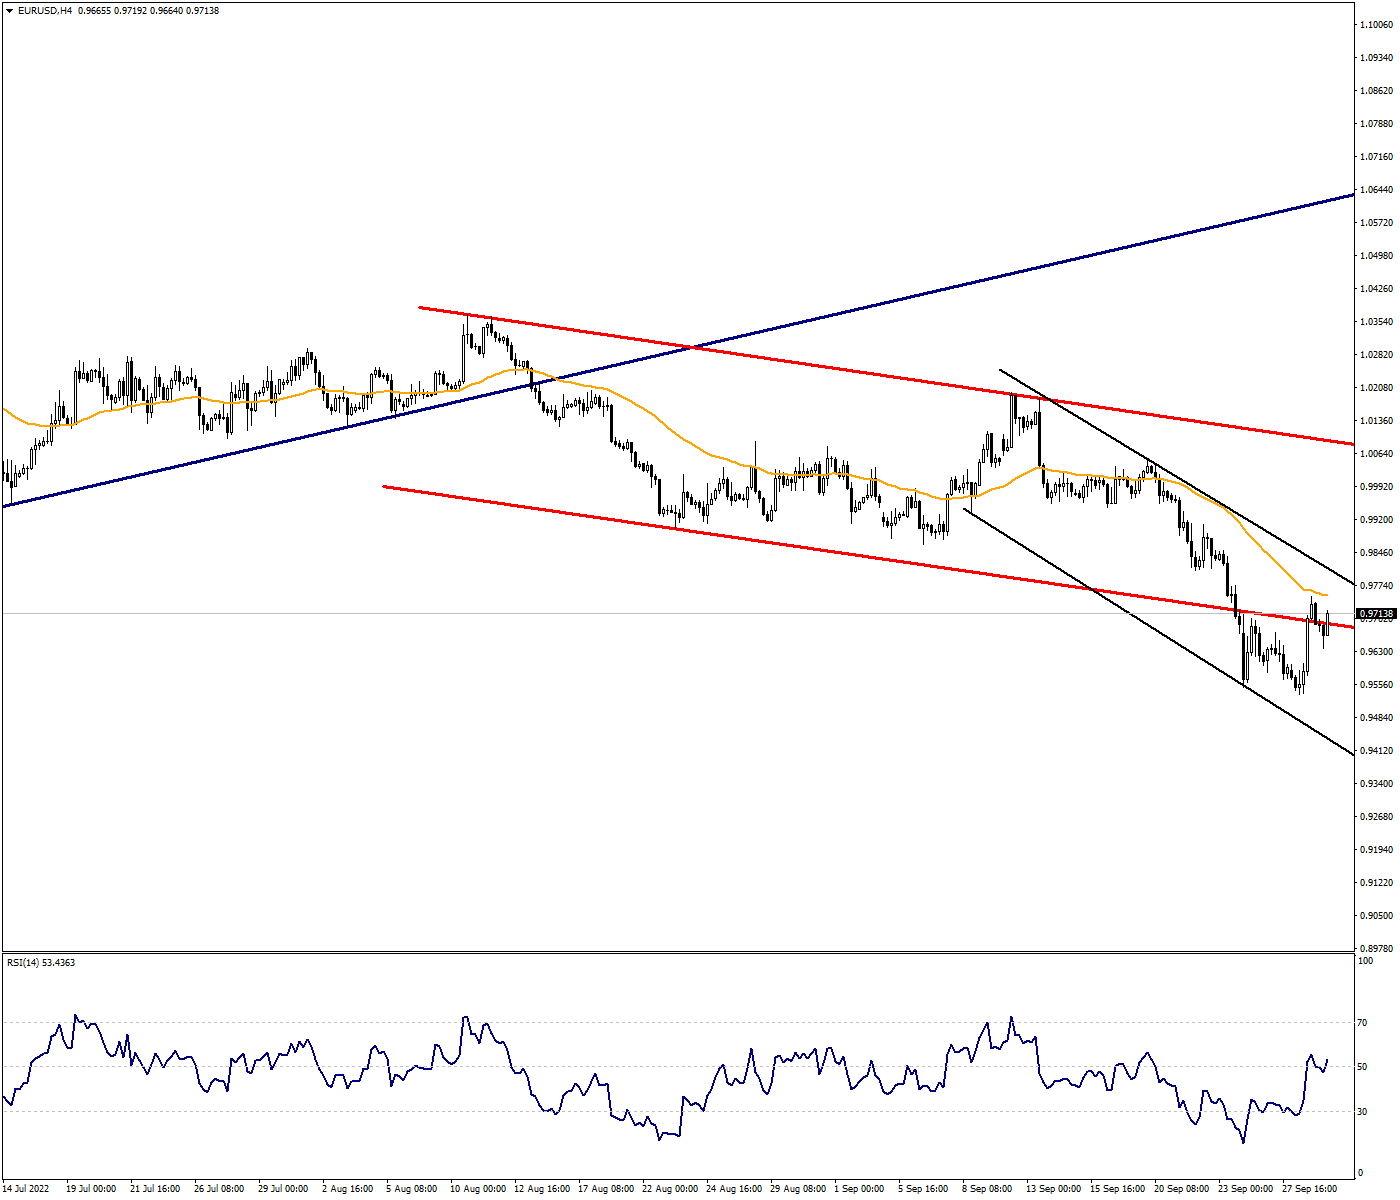 The Reactions May Not Be Permanent in EURUSD